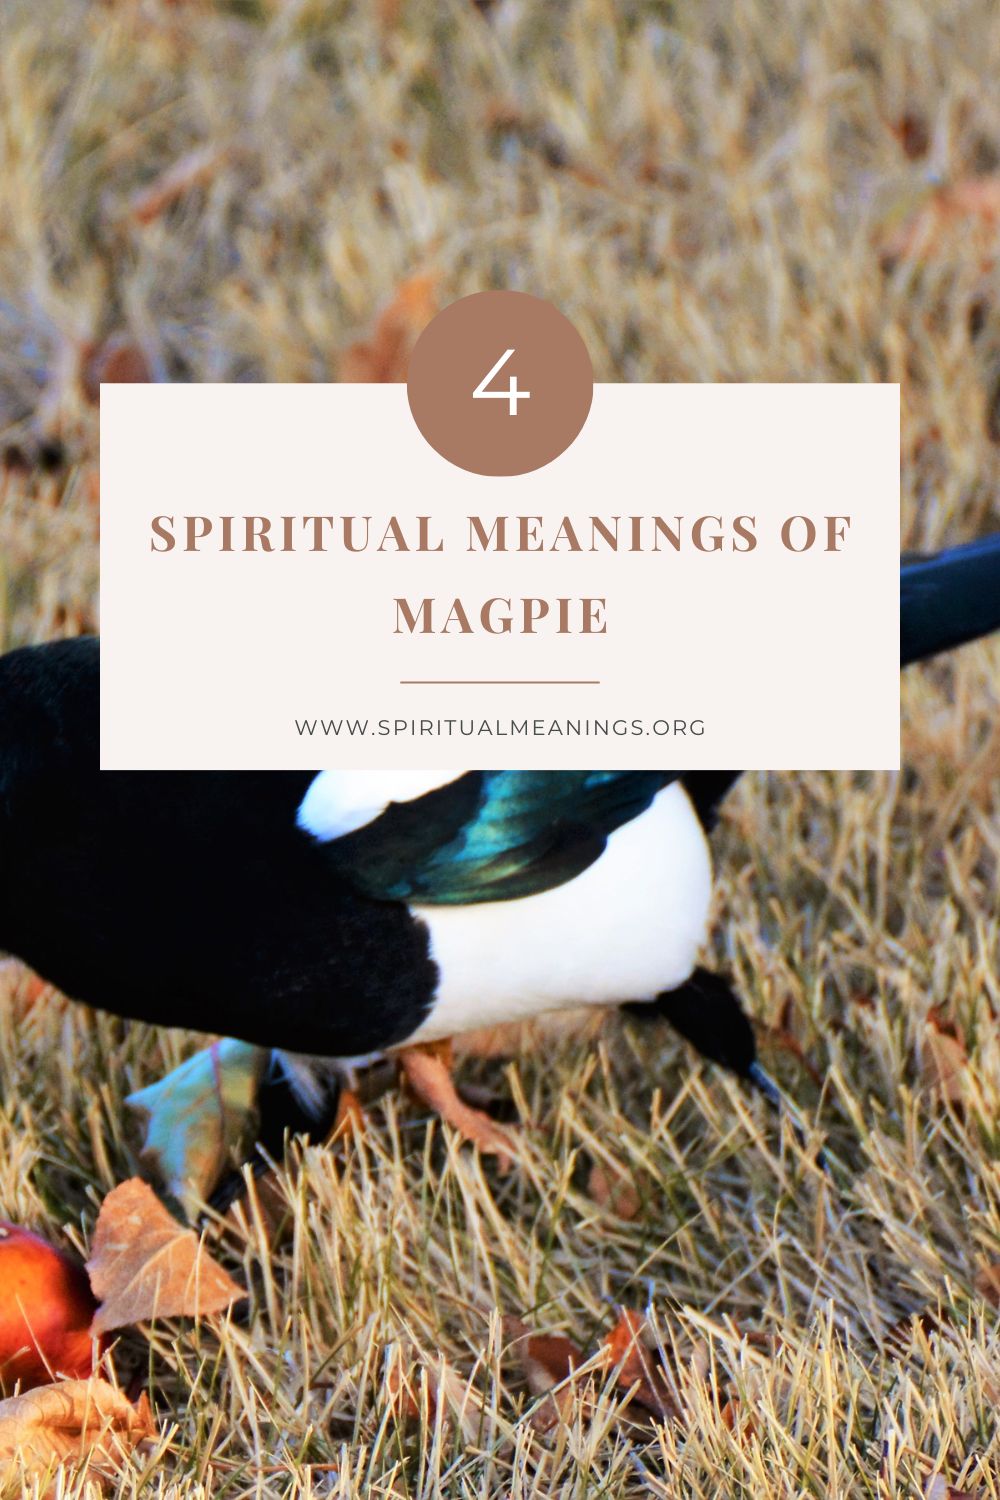 Spiritual Meanings of Magpie